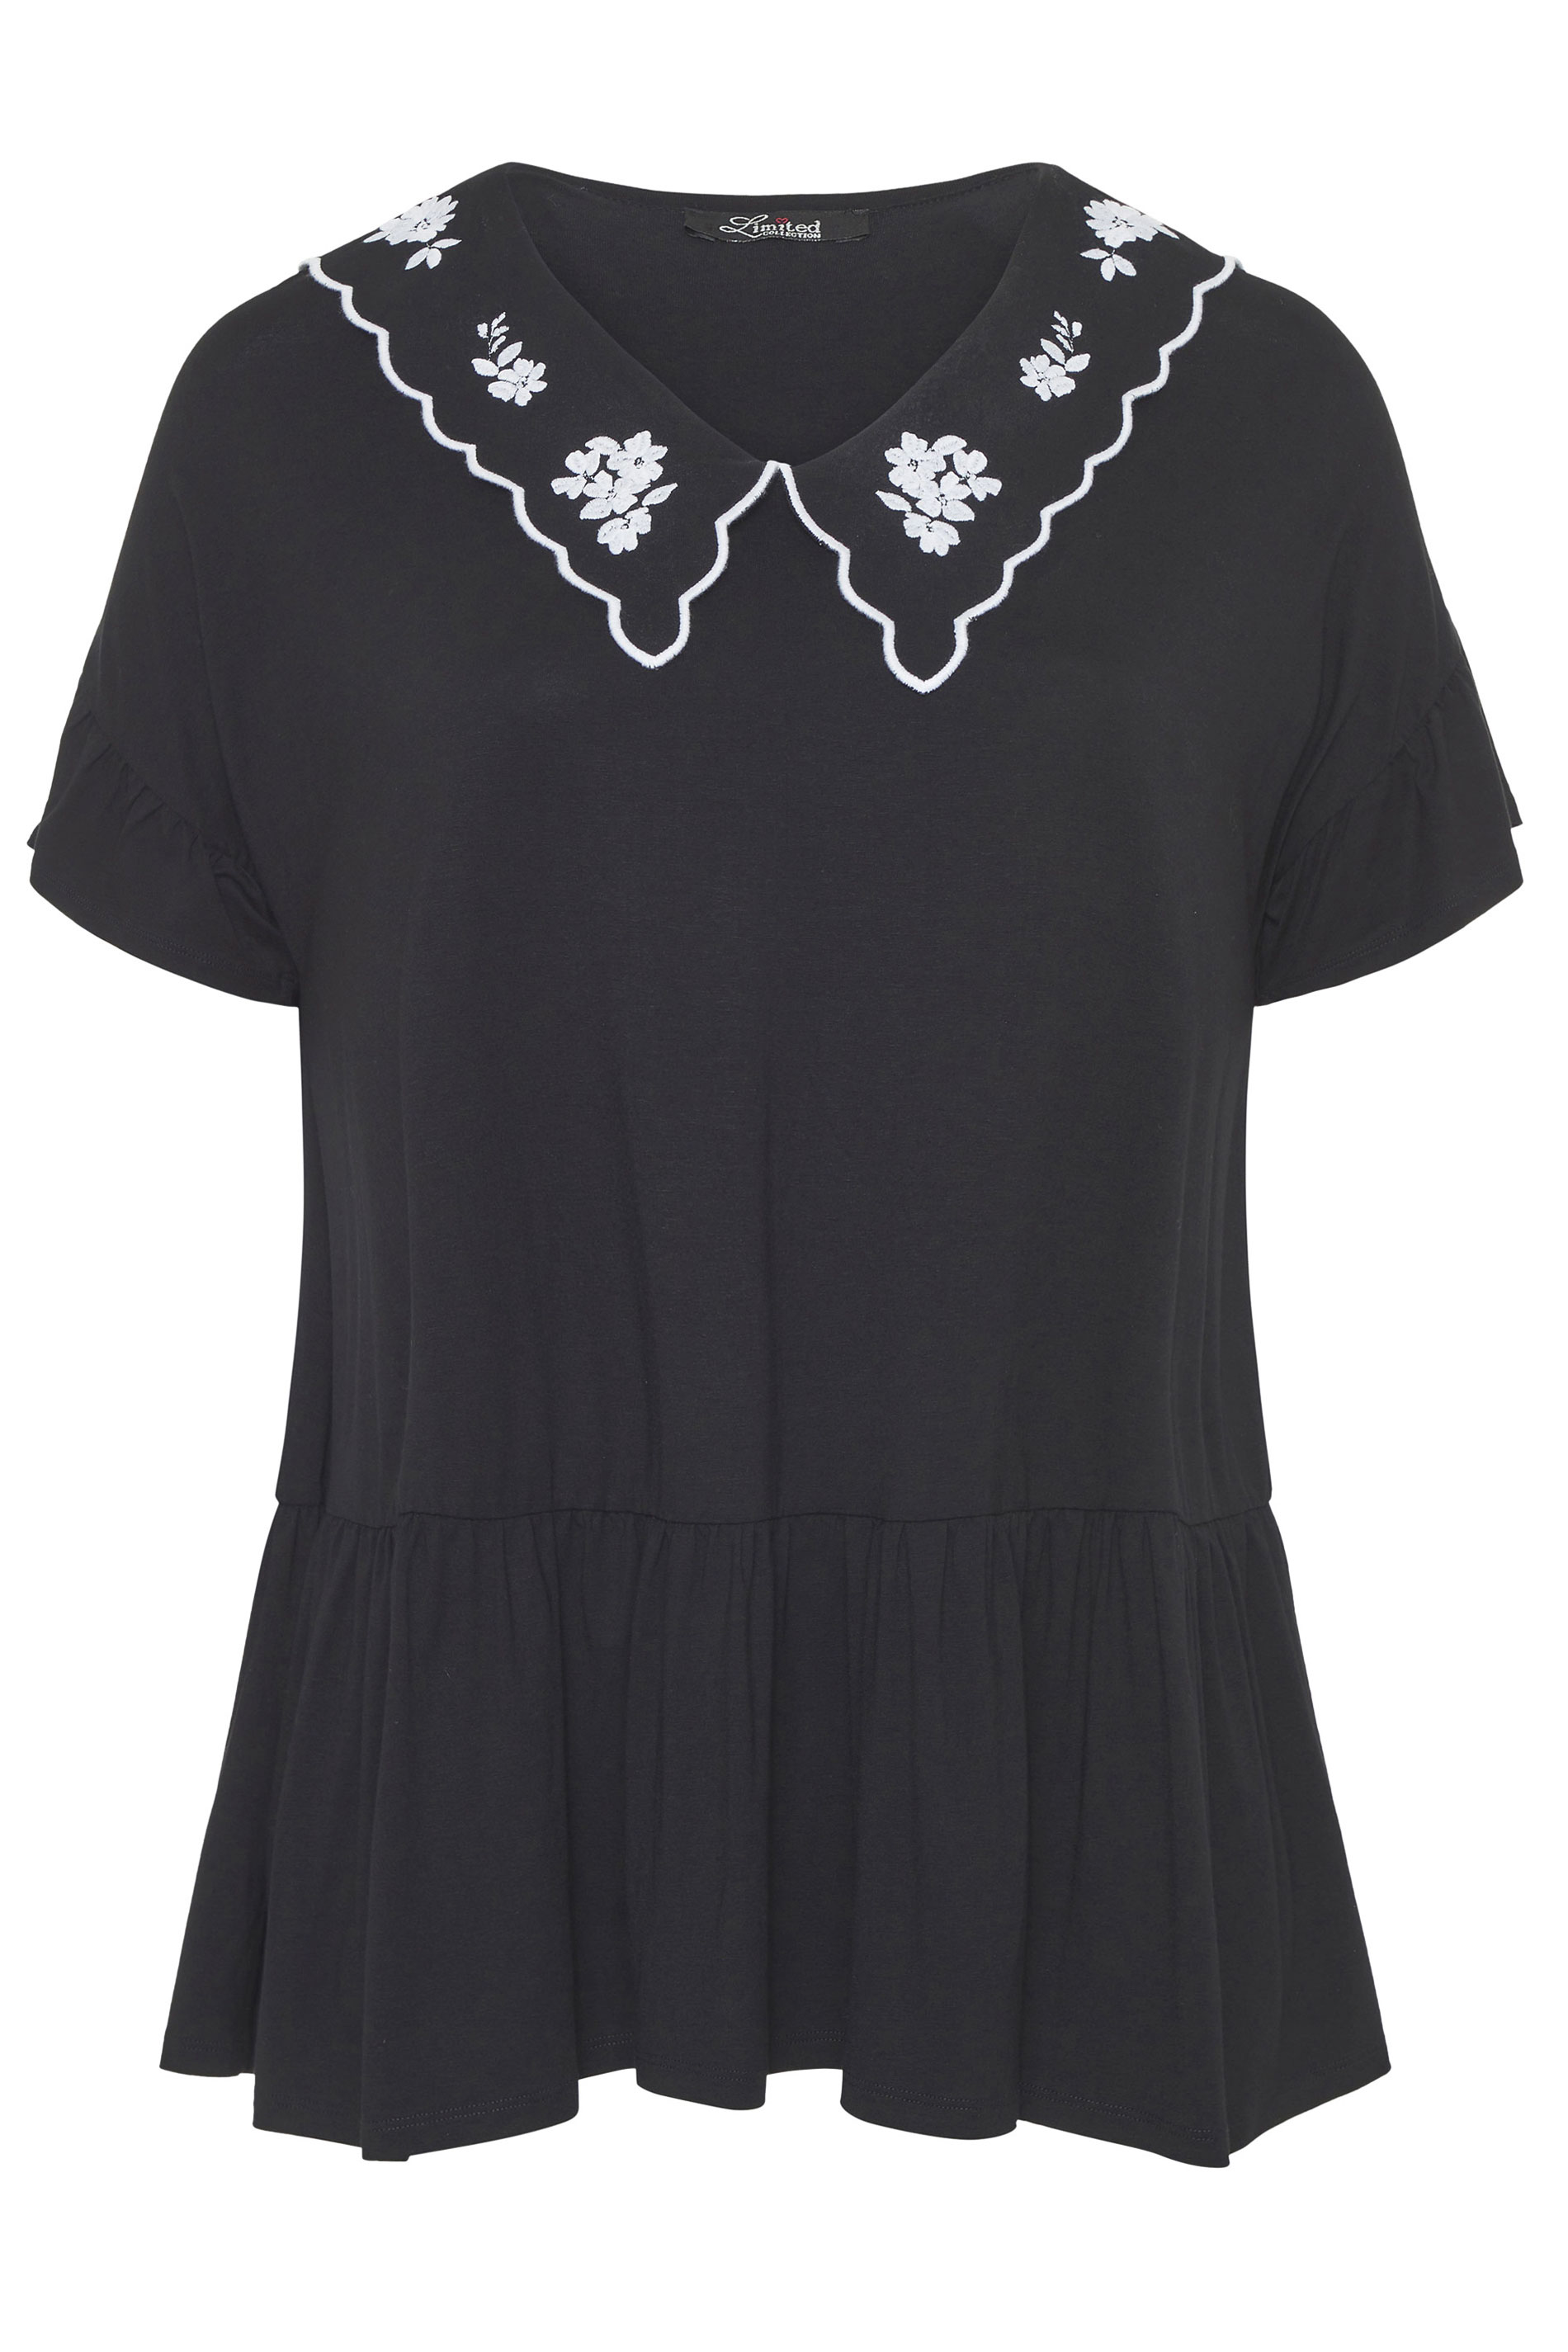 LIMITED COLLECTION Black Embroidered Collar Swing Top | Yours Clothing